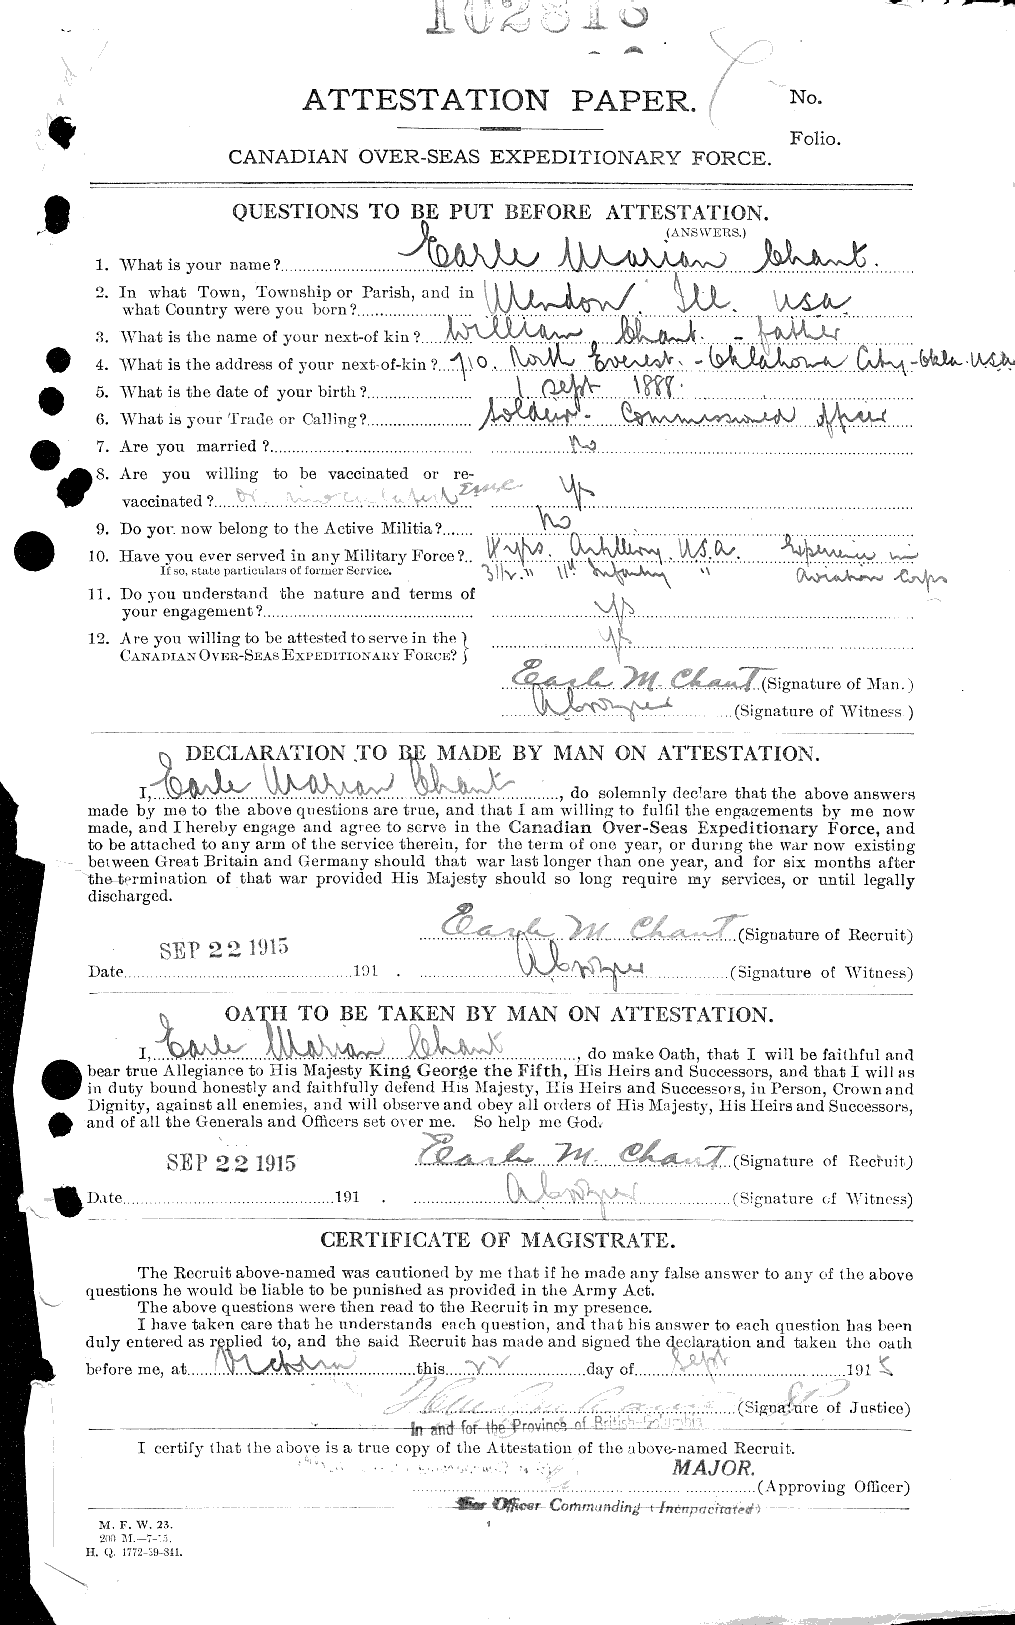 Personnel Records of the First World War - CEF 013855a